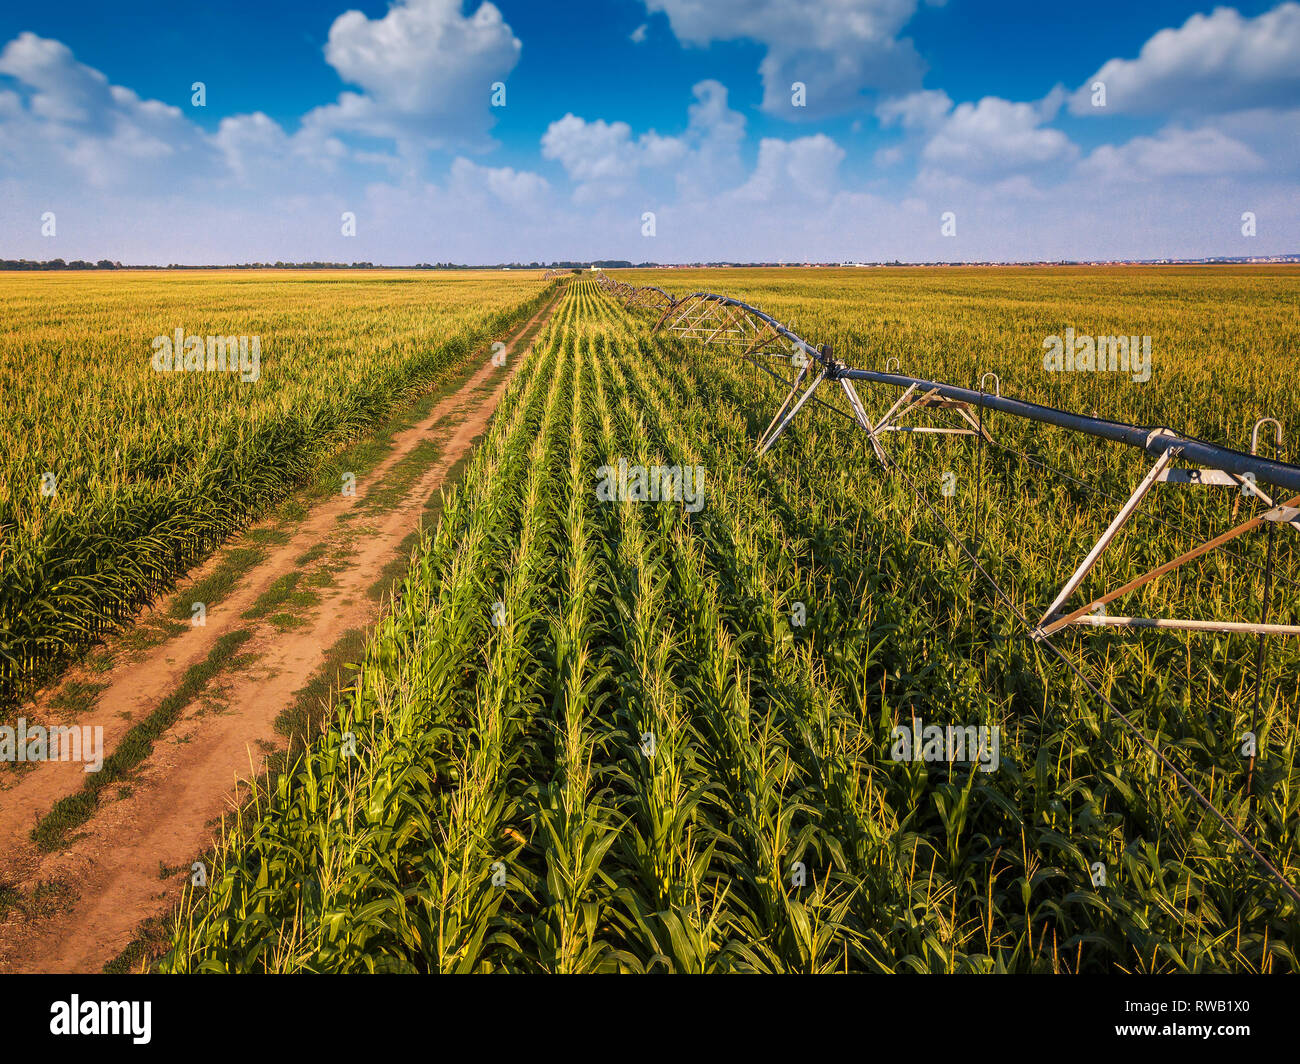 Drone photography, aerial view of water irrigation system in cultivated cornfield Stock Photo